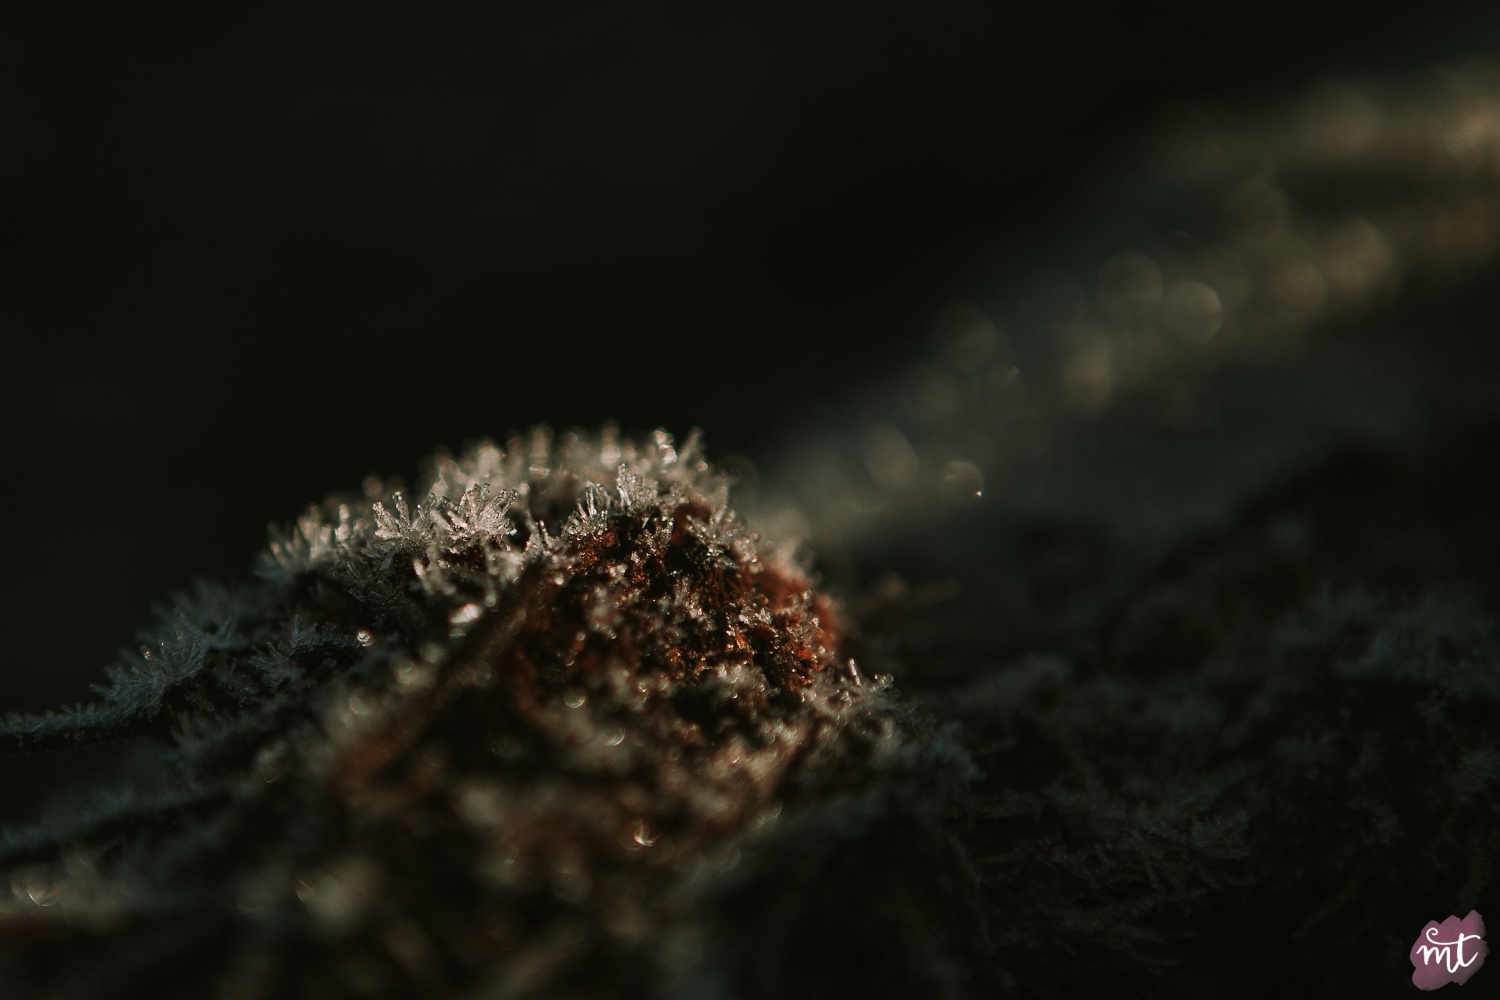 Seasons, Winter, Natural Light, UK Photographer, Real Life, Mother Nature, Frost, Jack Frost